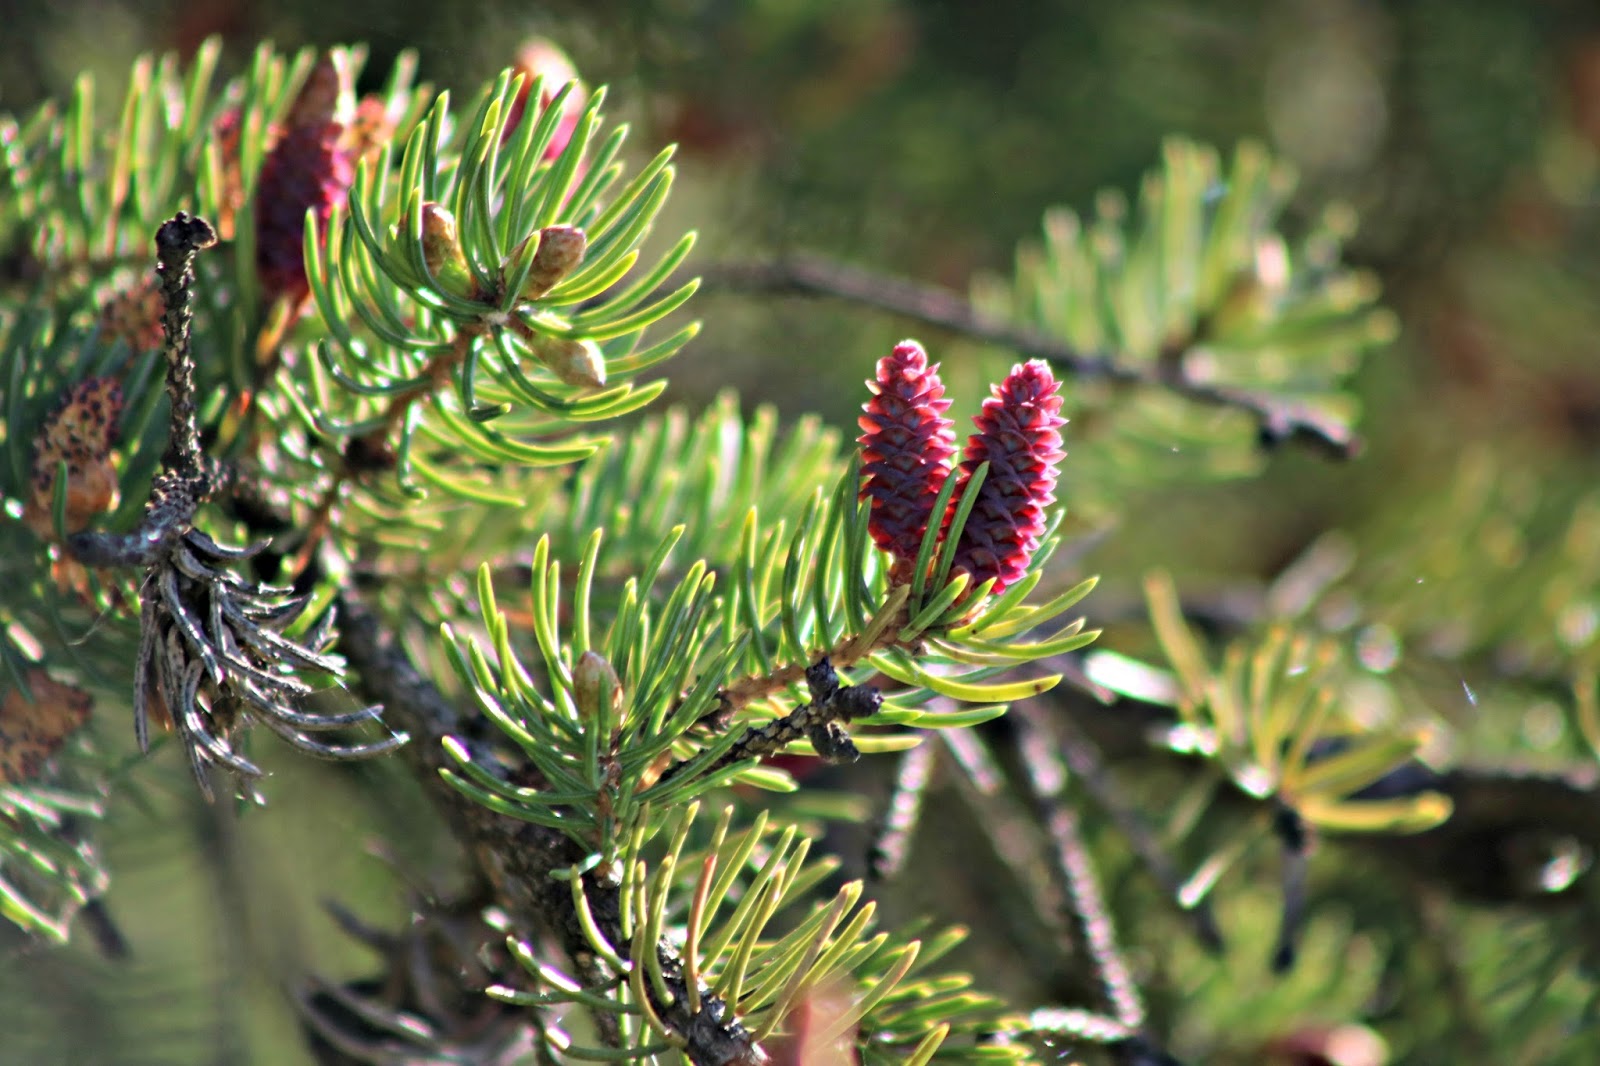 Our Retirement Days: Pines in Flower